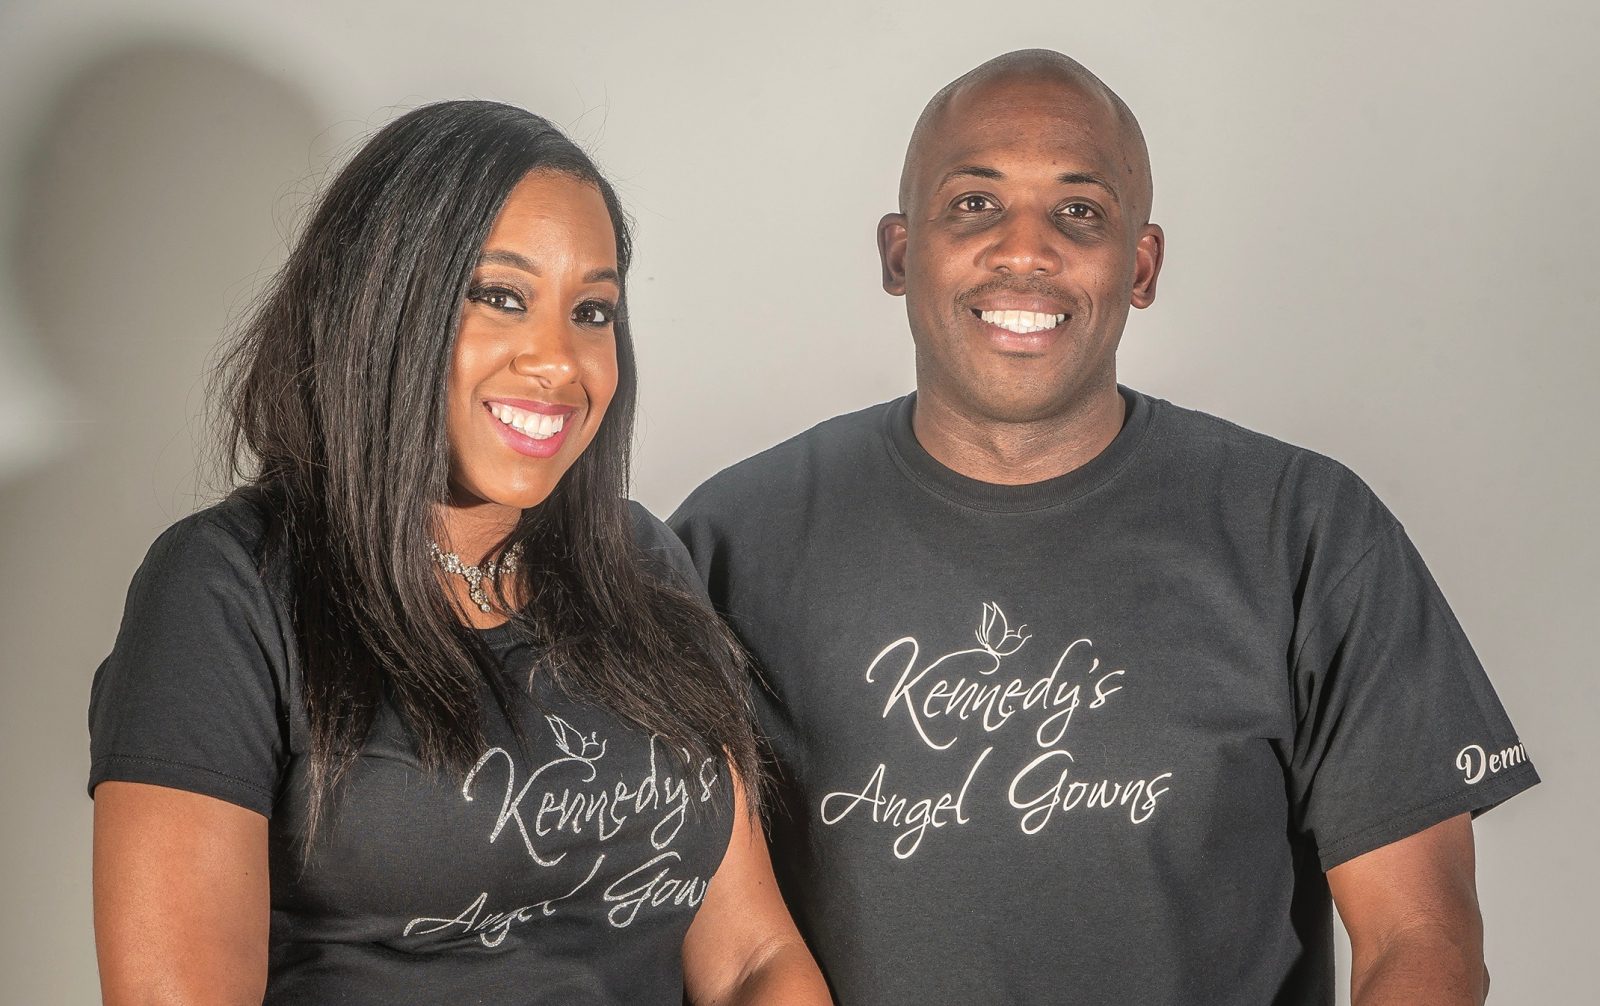 Kennedy's Angel Gowns, Giving Back Awards